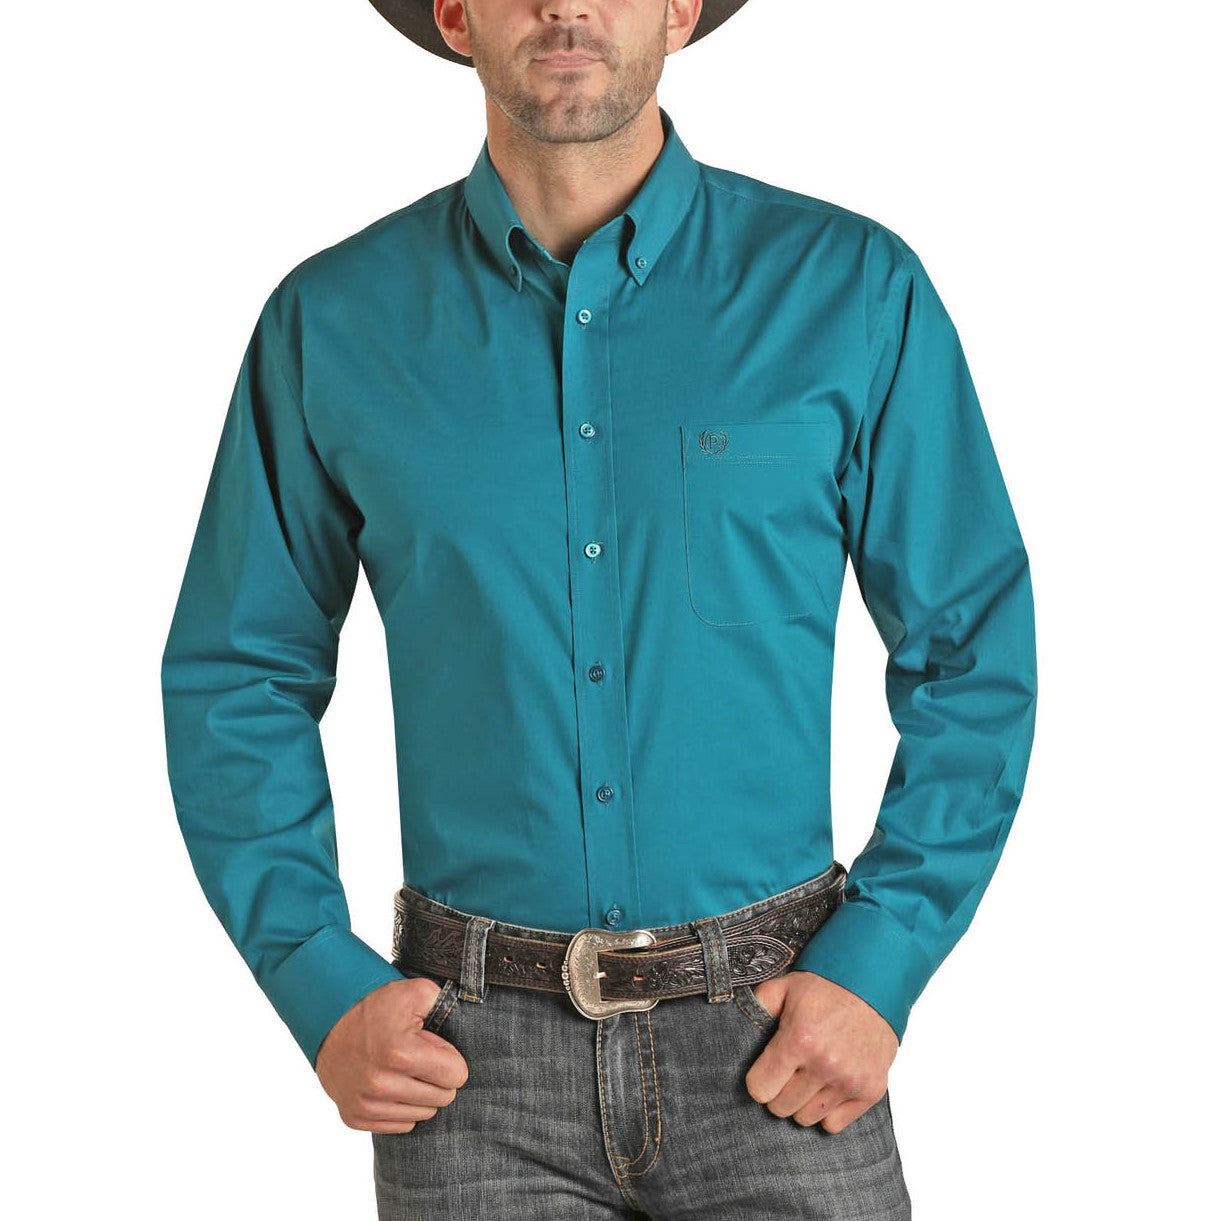 Panhandle Men's Solid Stretch Teal Button-Down Shirt 36D1601